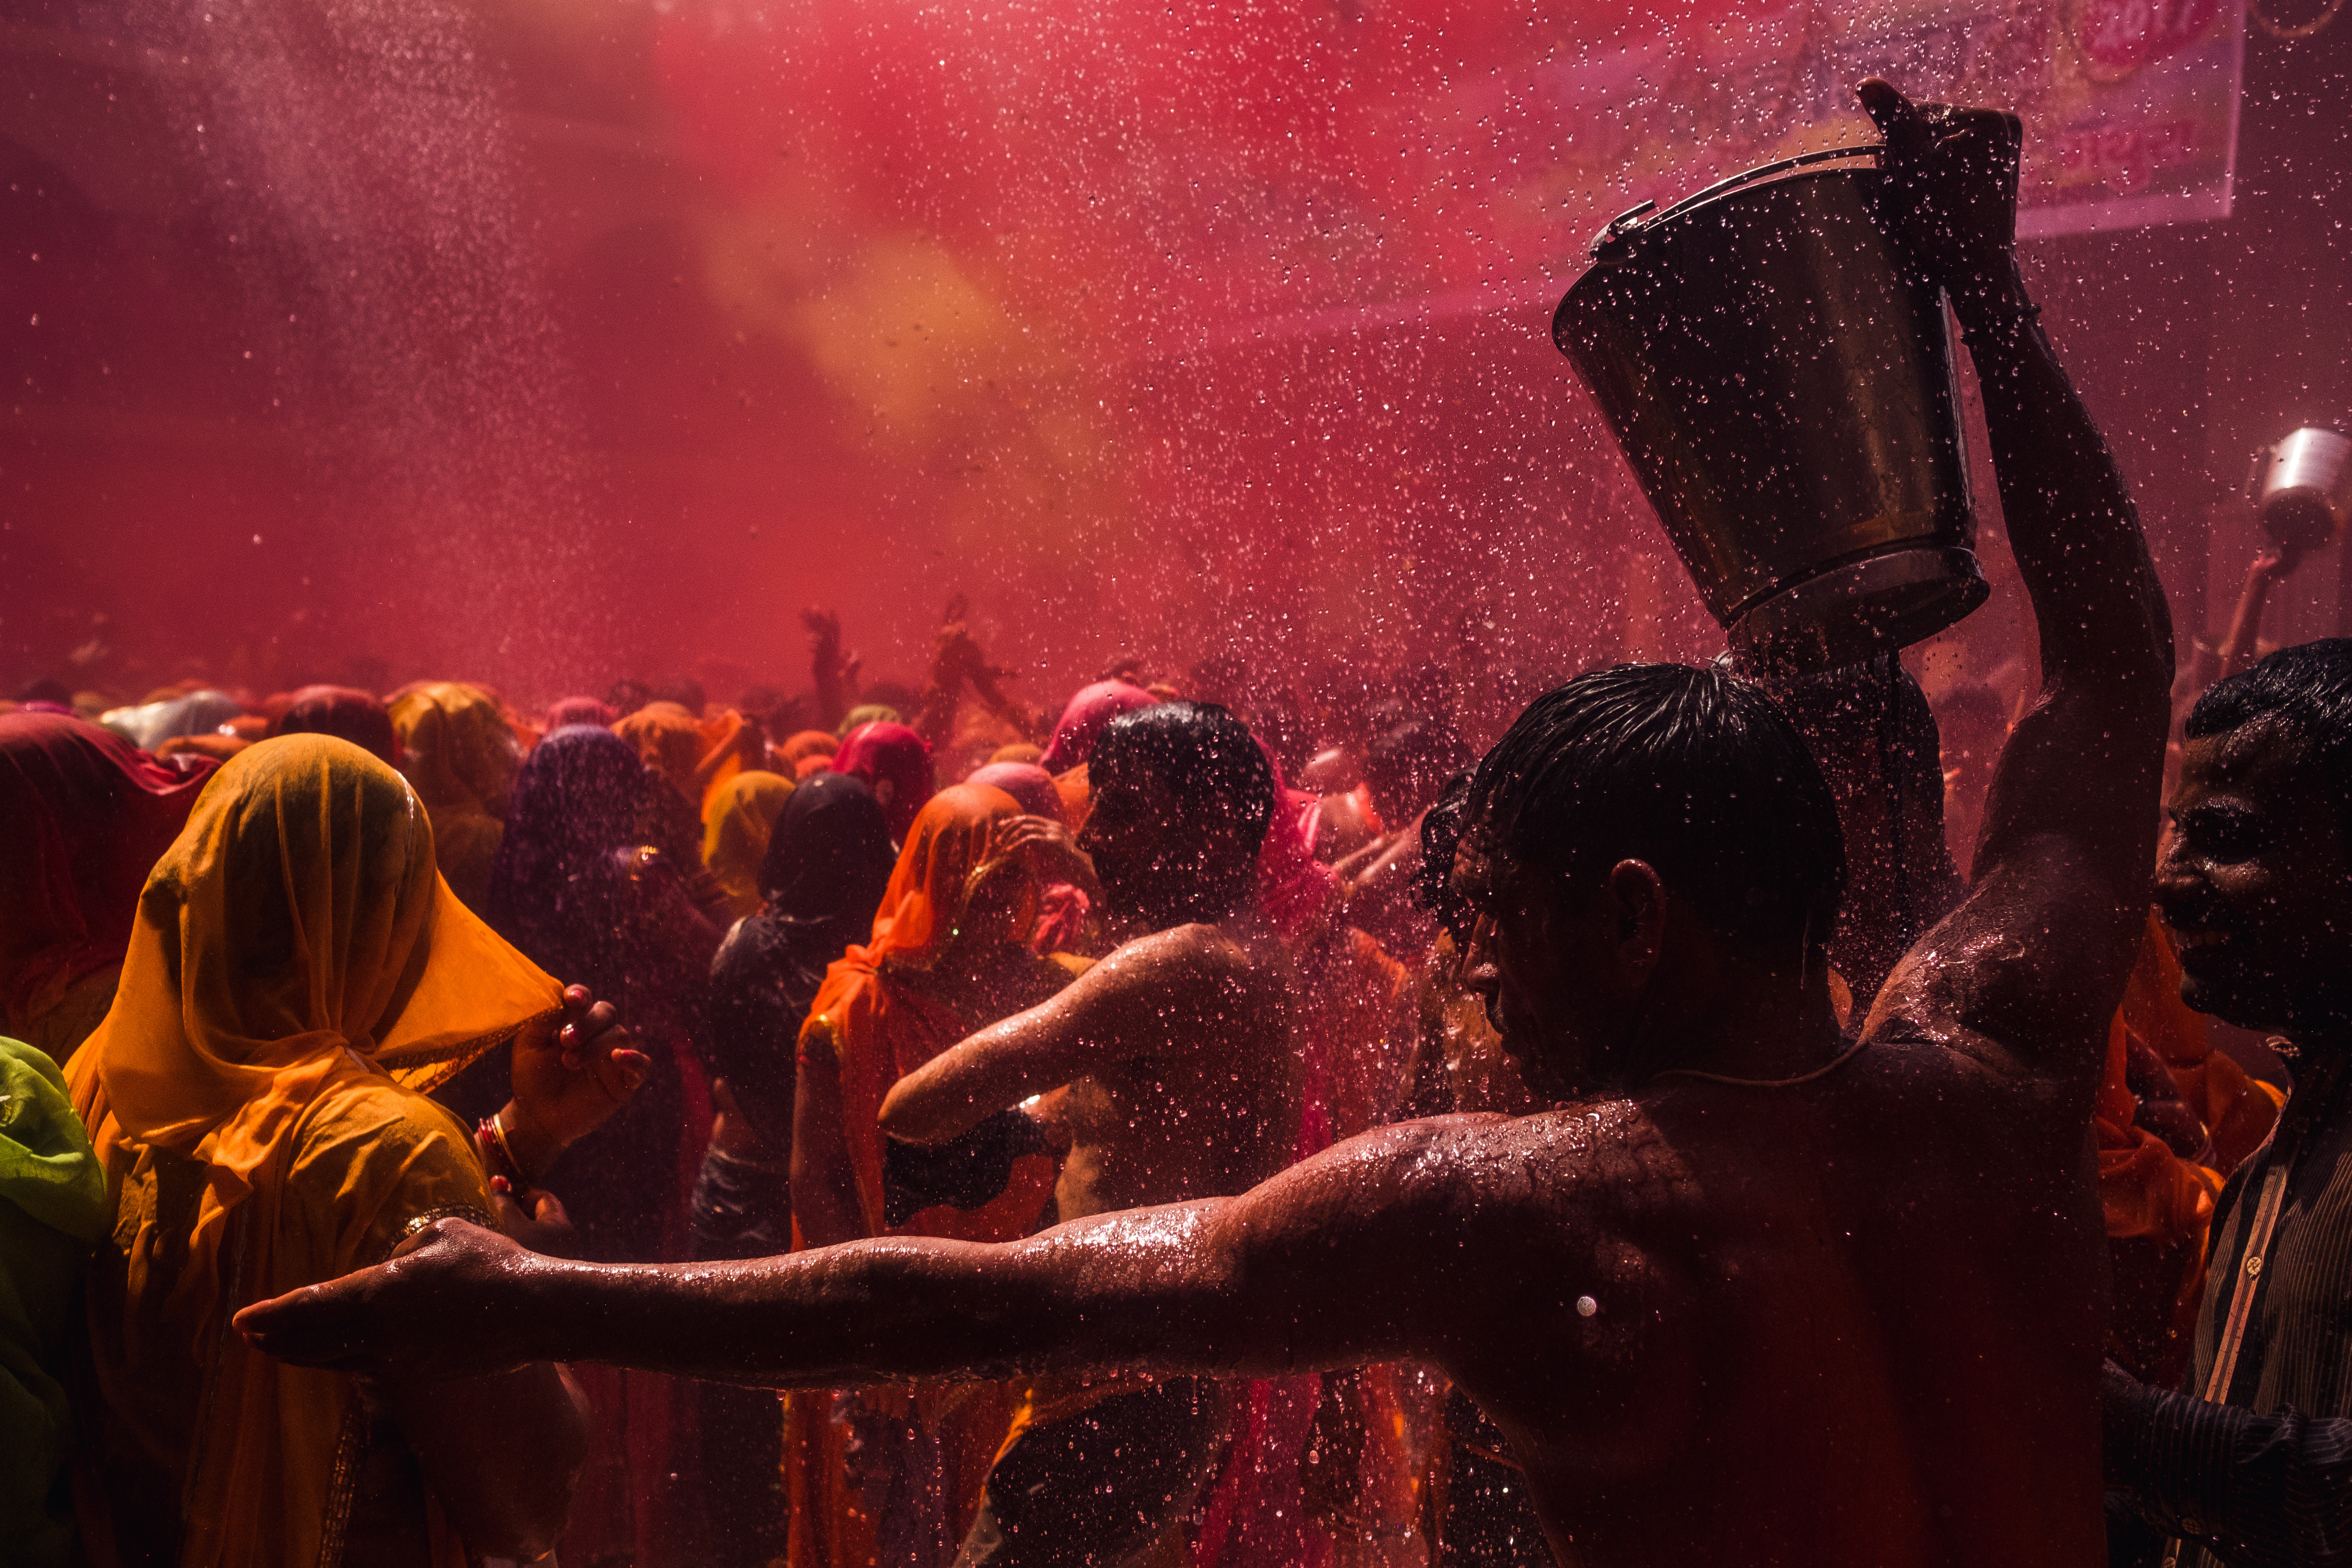 India Street Photography During Holi Festival. man gestures to people as he fills his bucket with water. Images by Jason Vinson